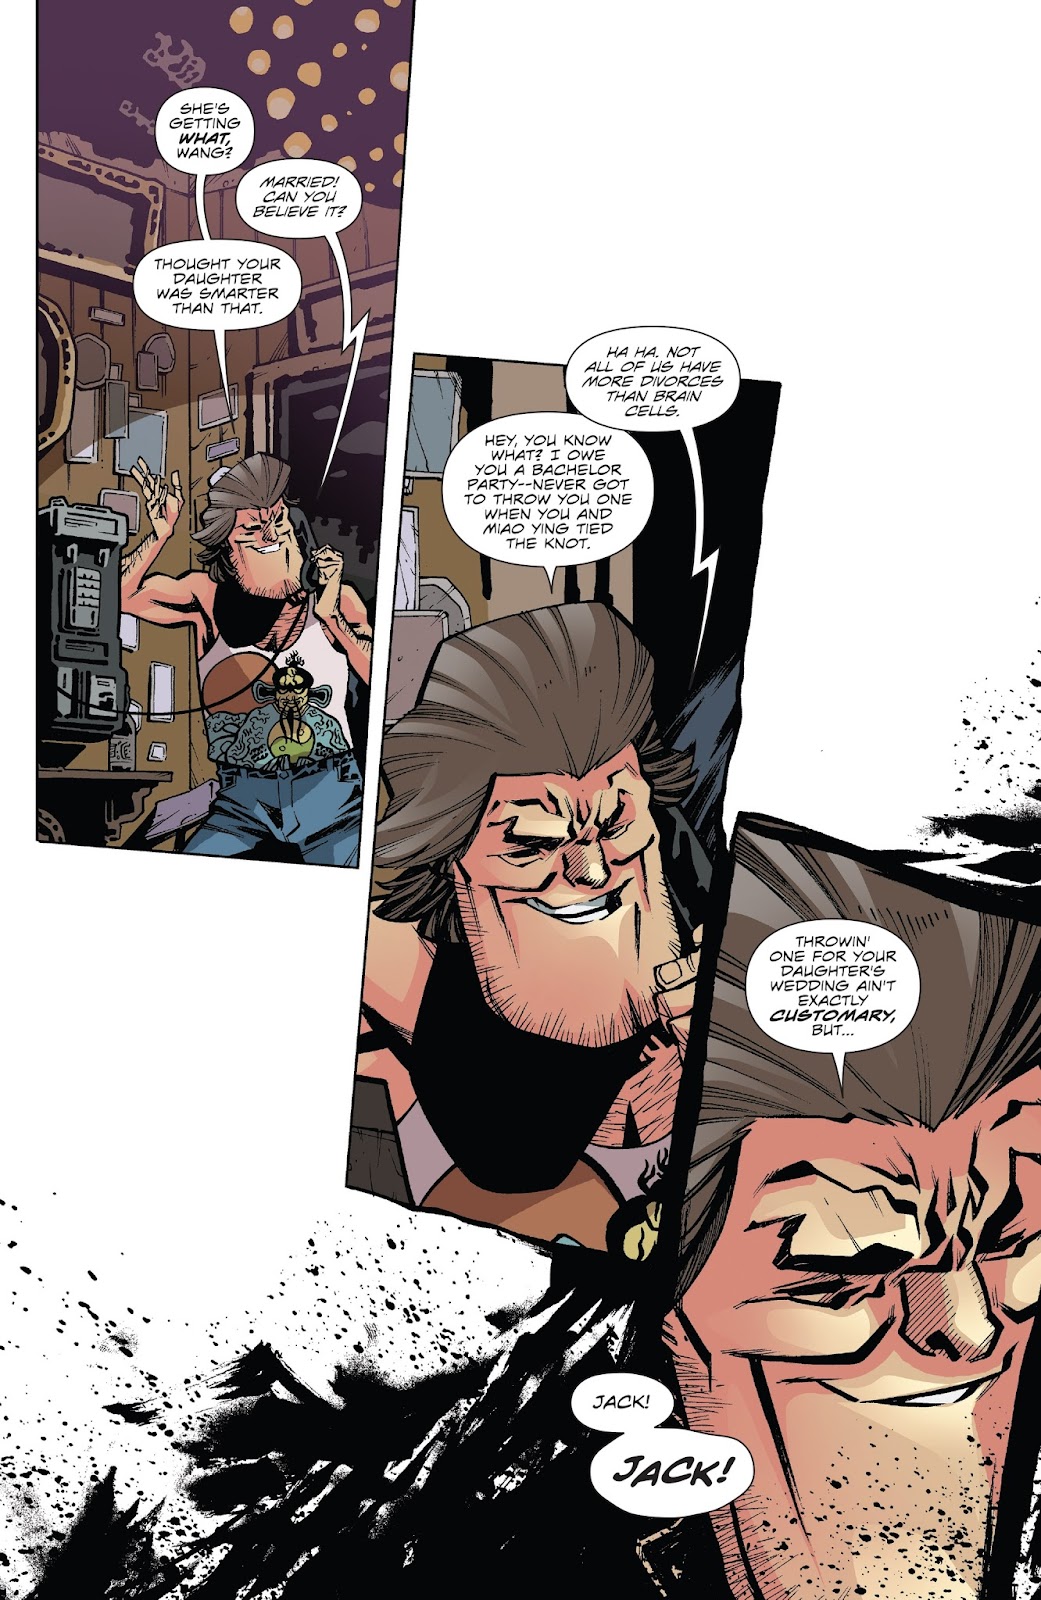 Big Trouble in Little China: Old Man Jack issue 3 - Page 7